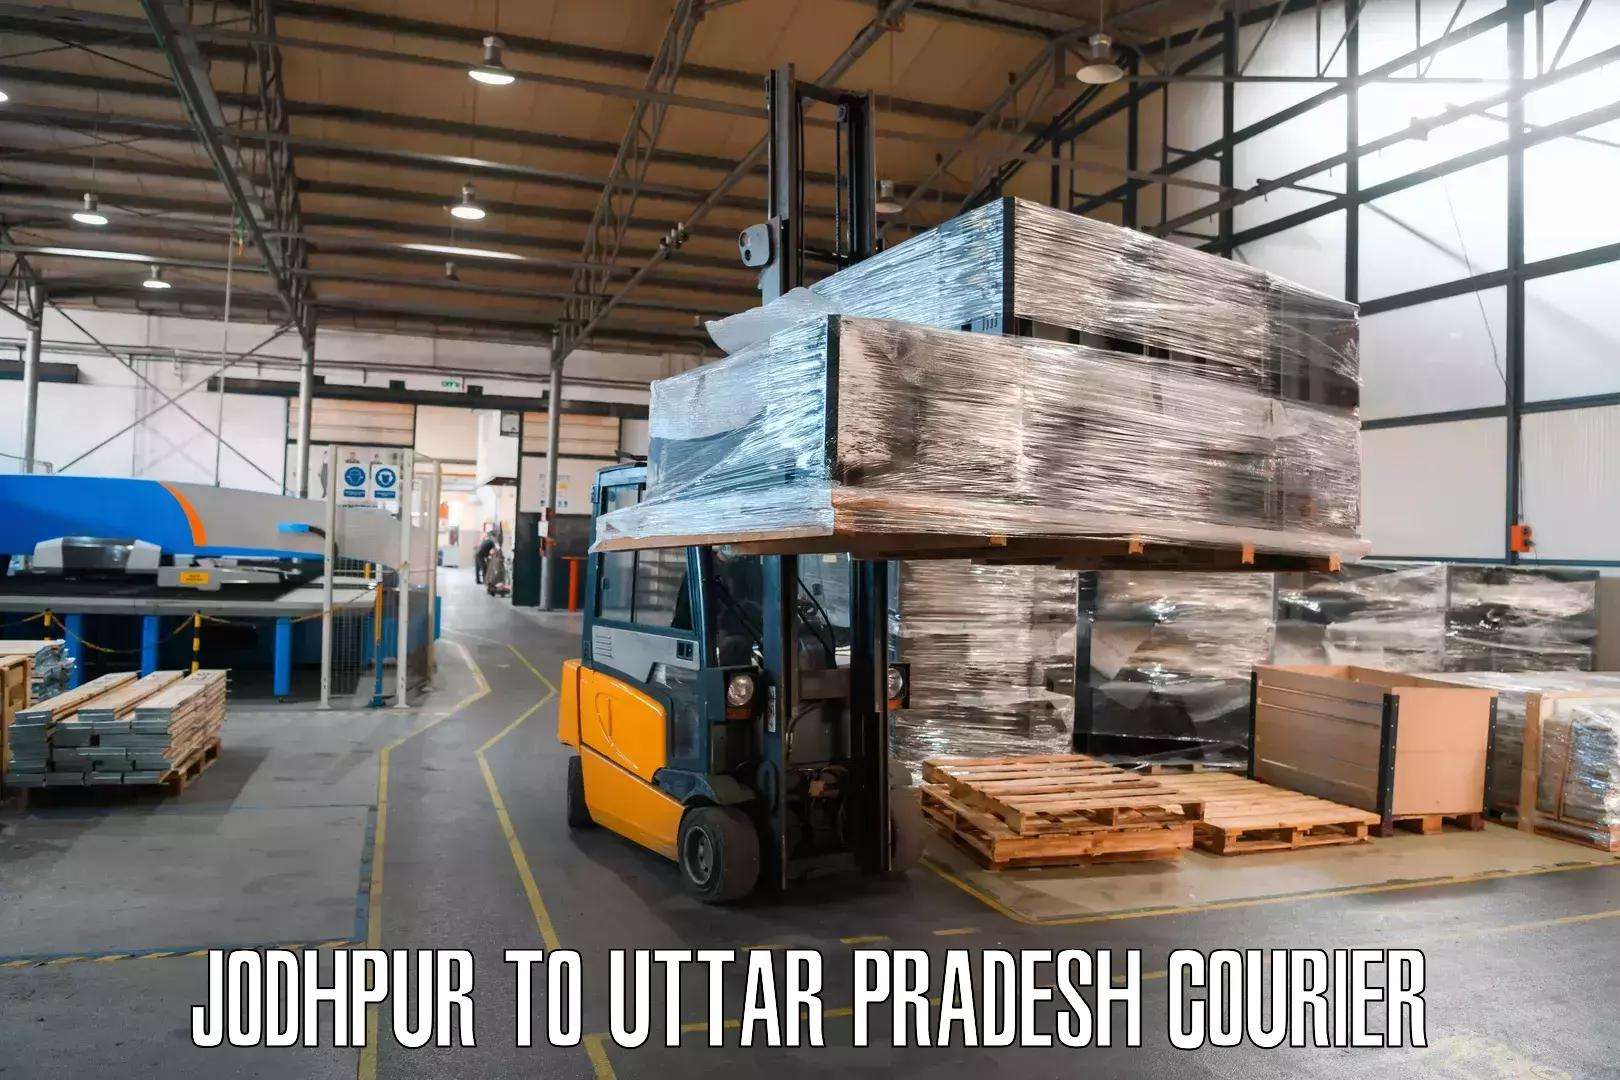 State-of-the-art courier technology Jodhpur to Fatehabad Agra